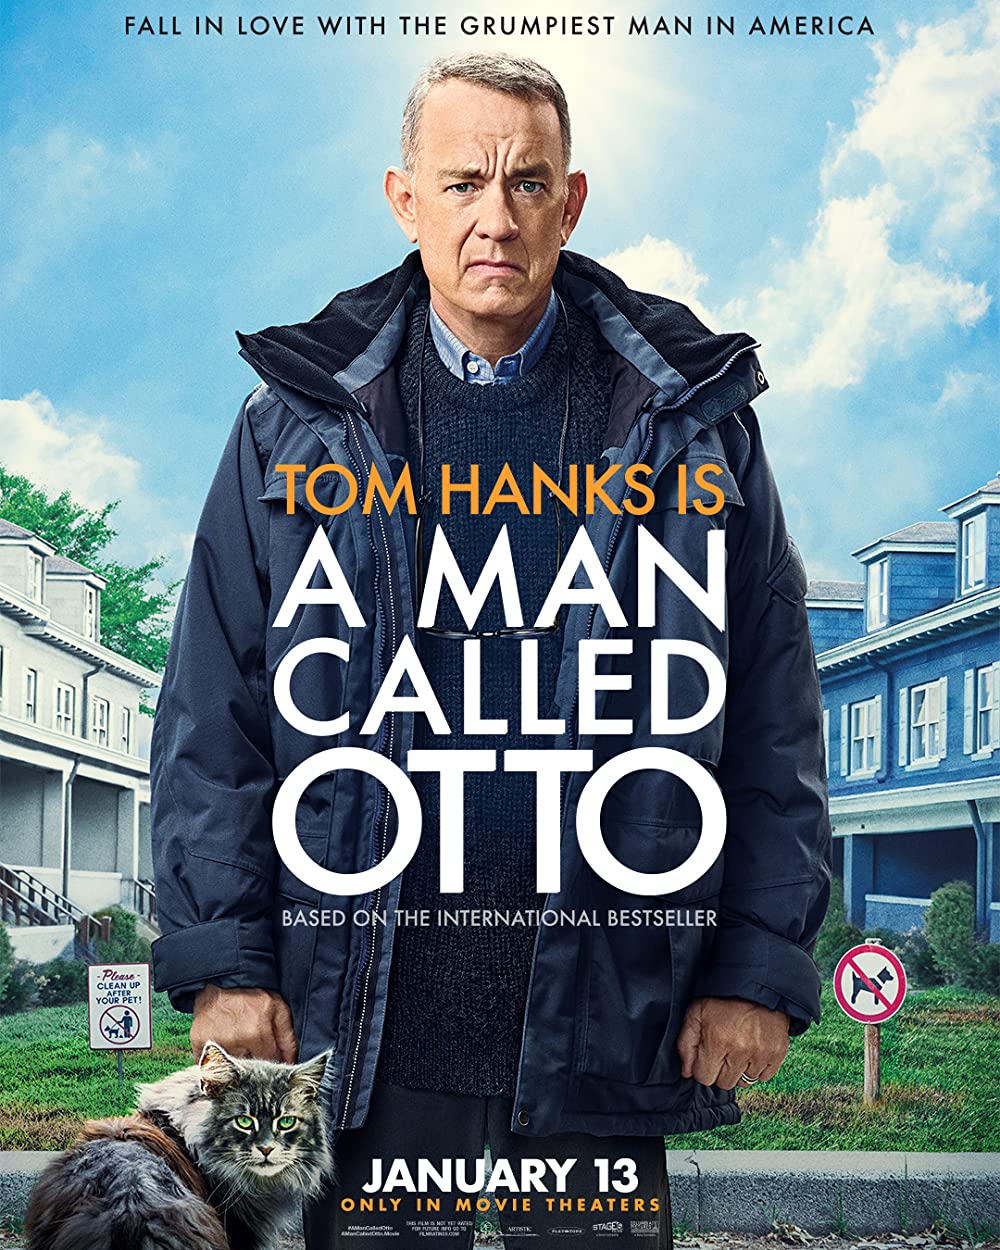 Cover Art for "A Man Called Otto"